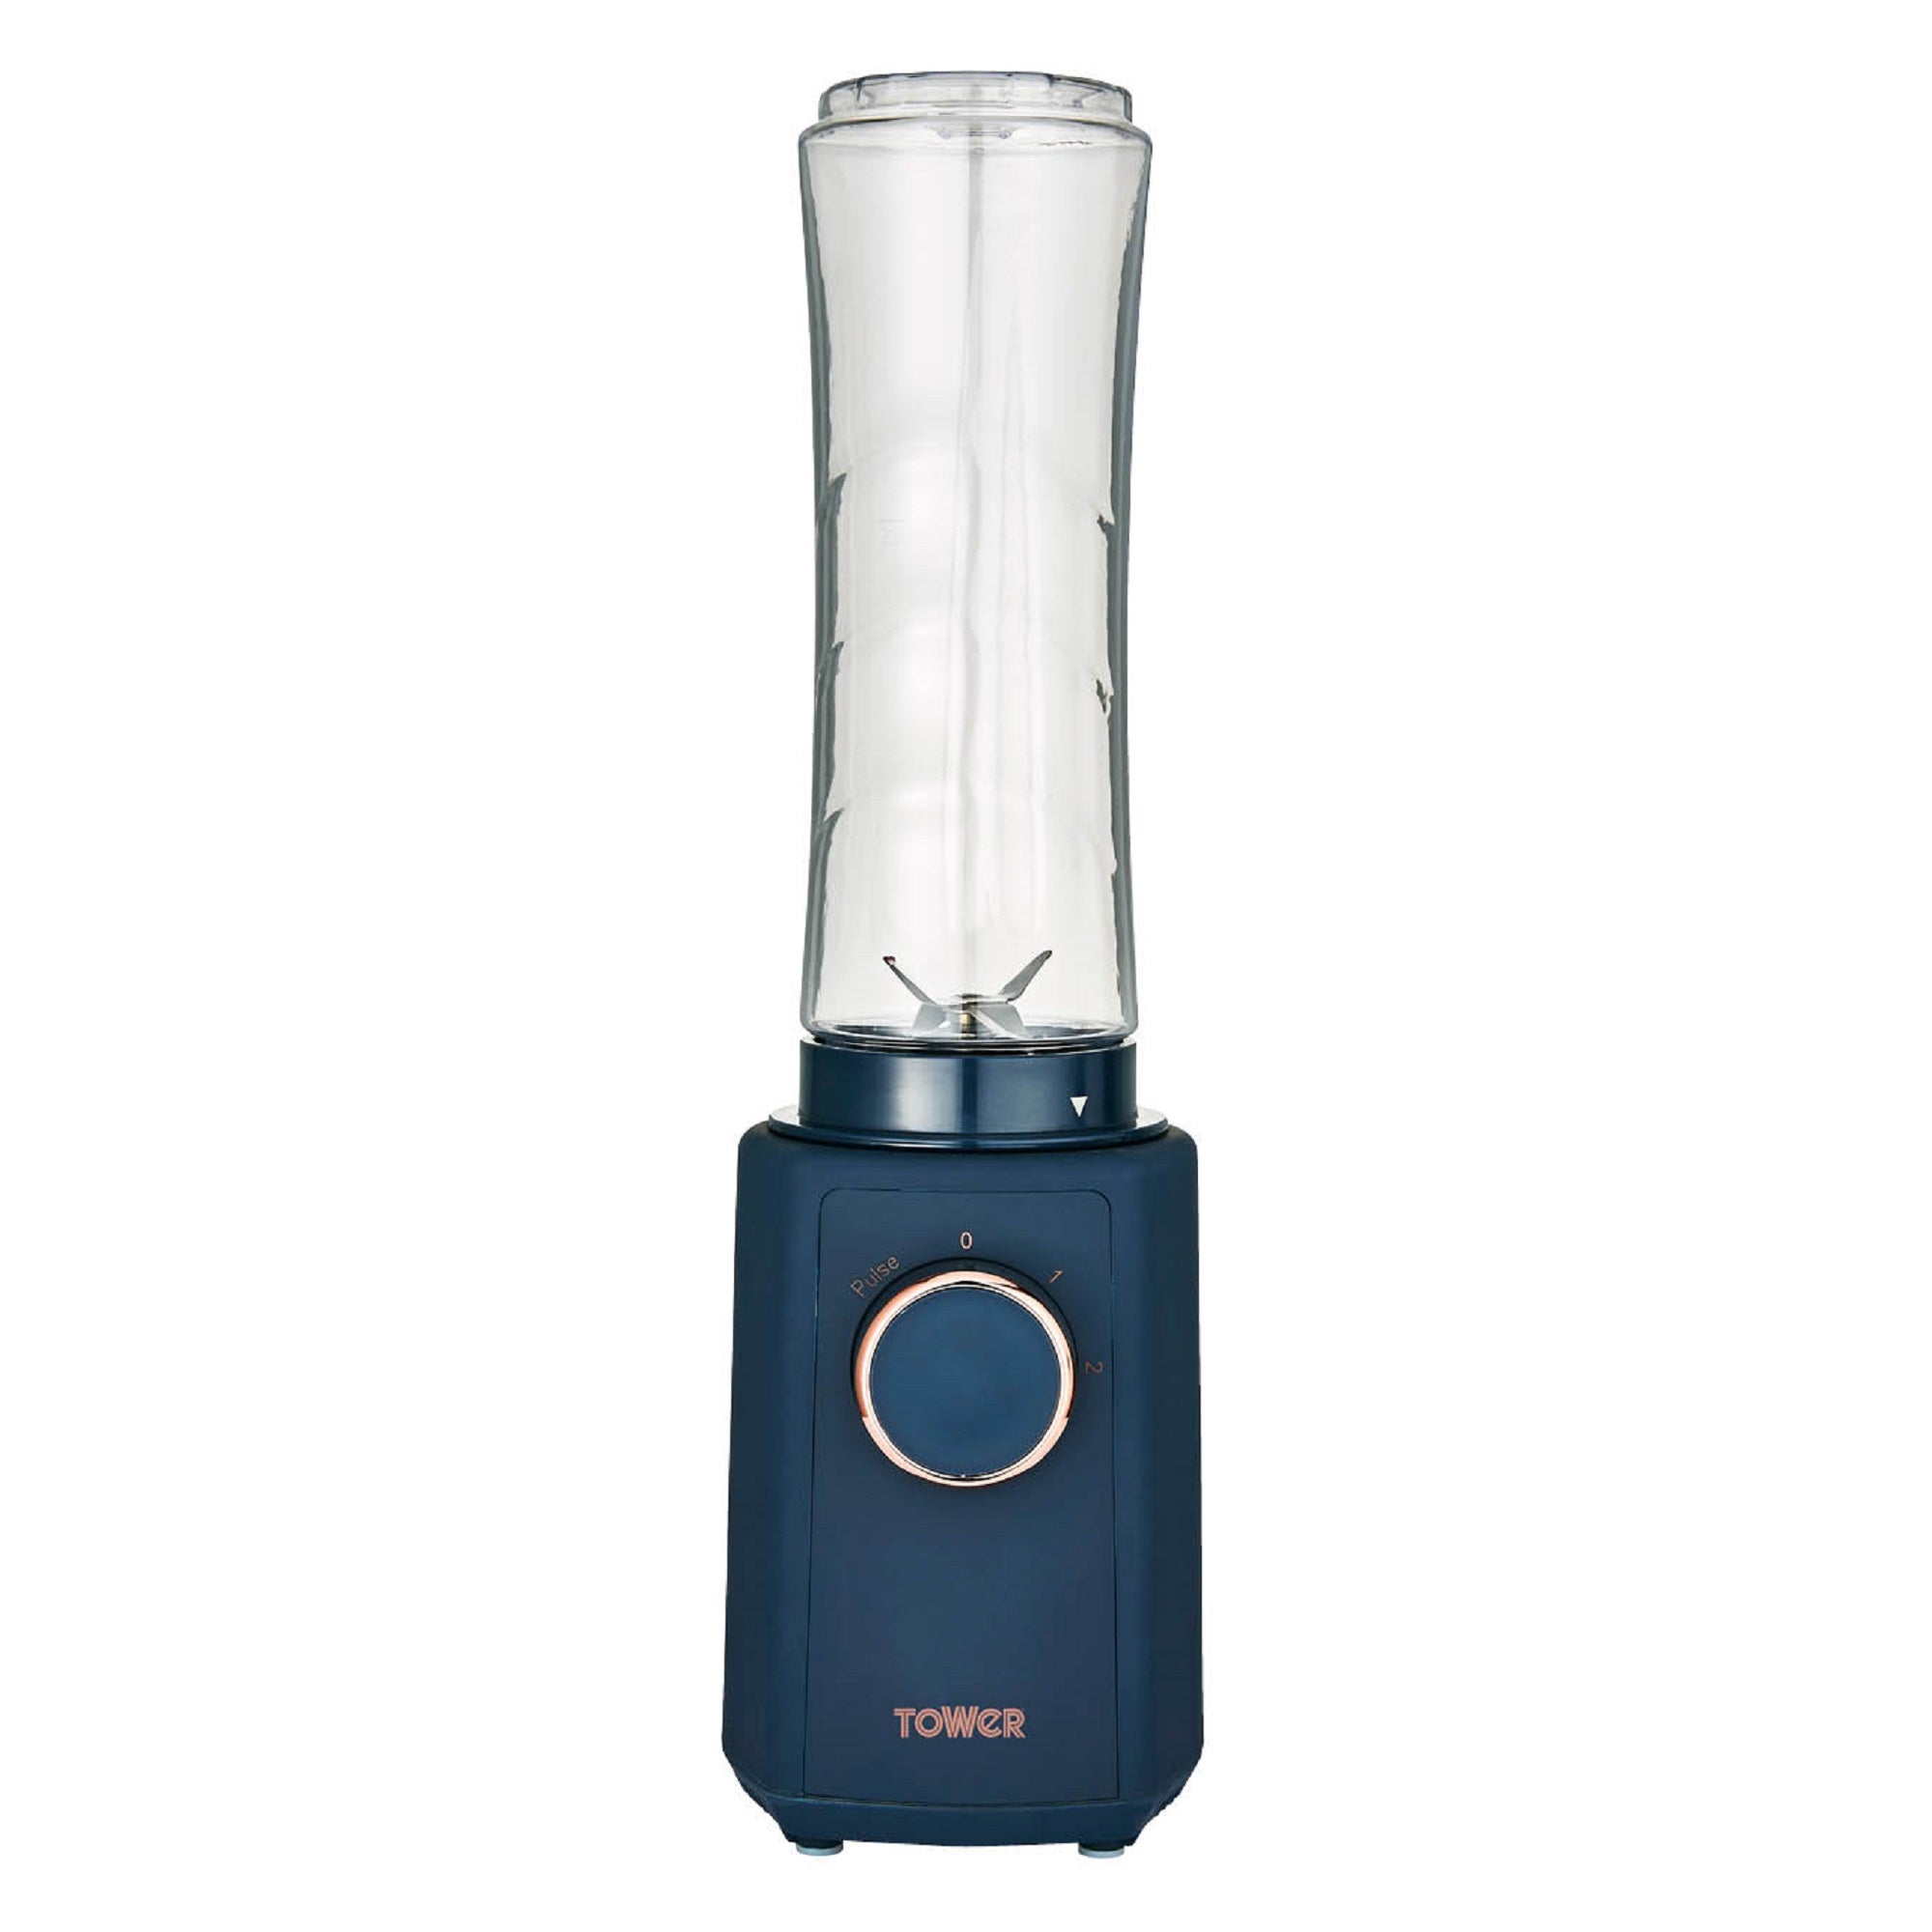 Tower Cavaletto 300w Personal Blender Navy